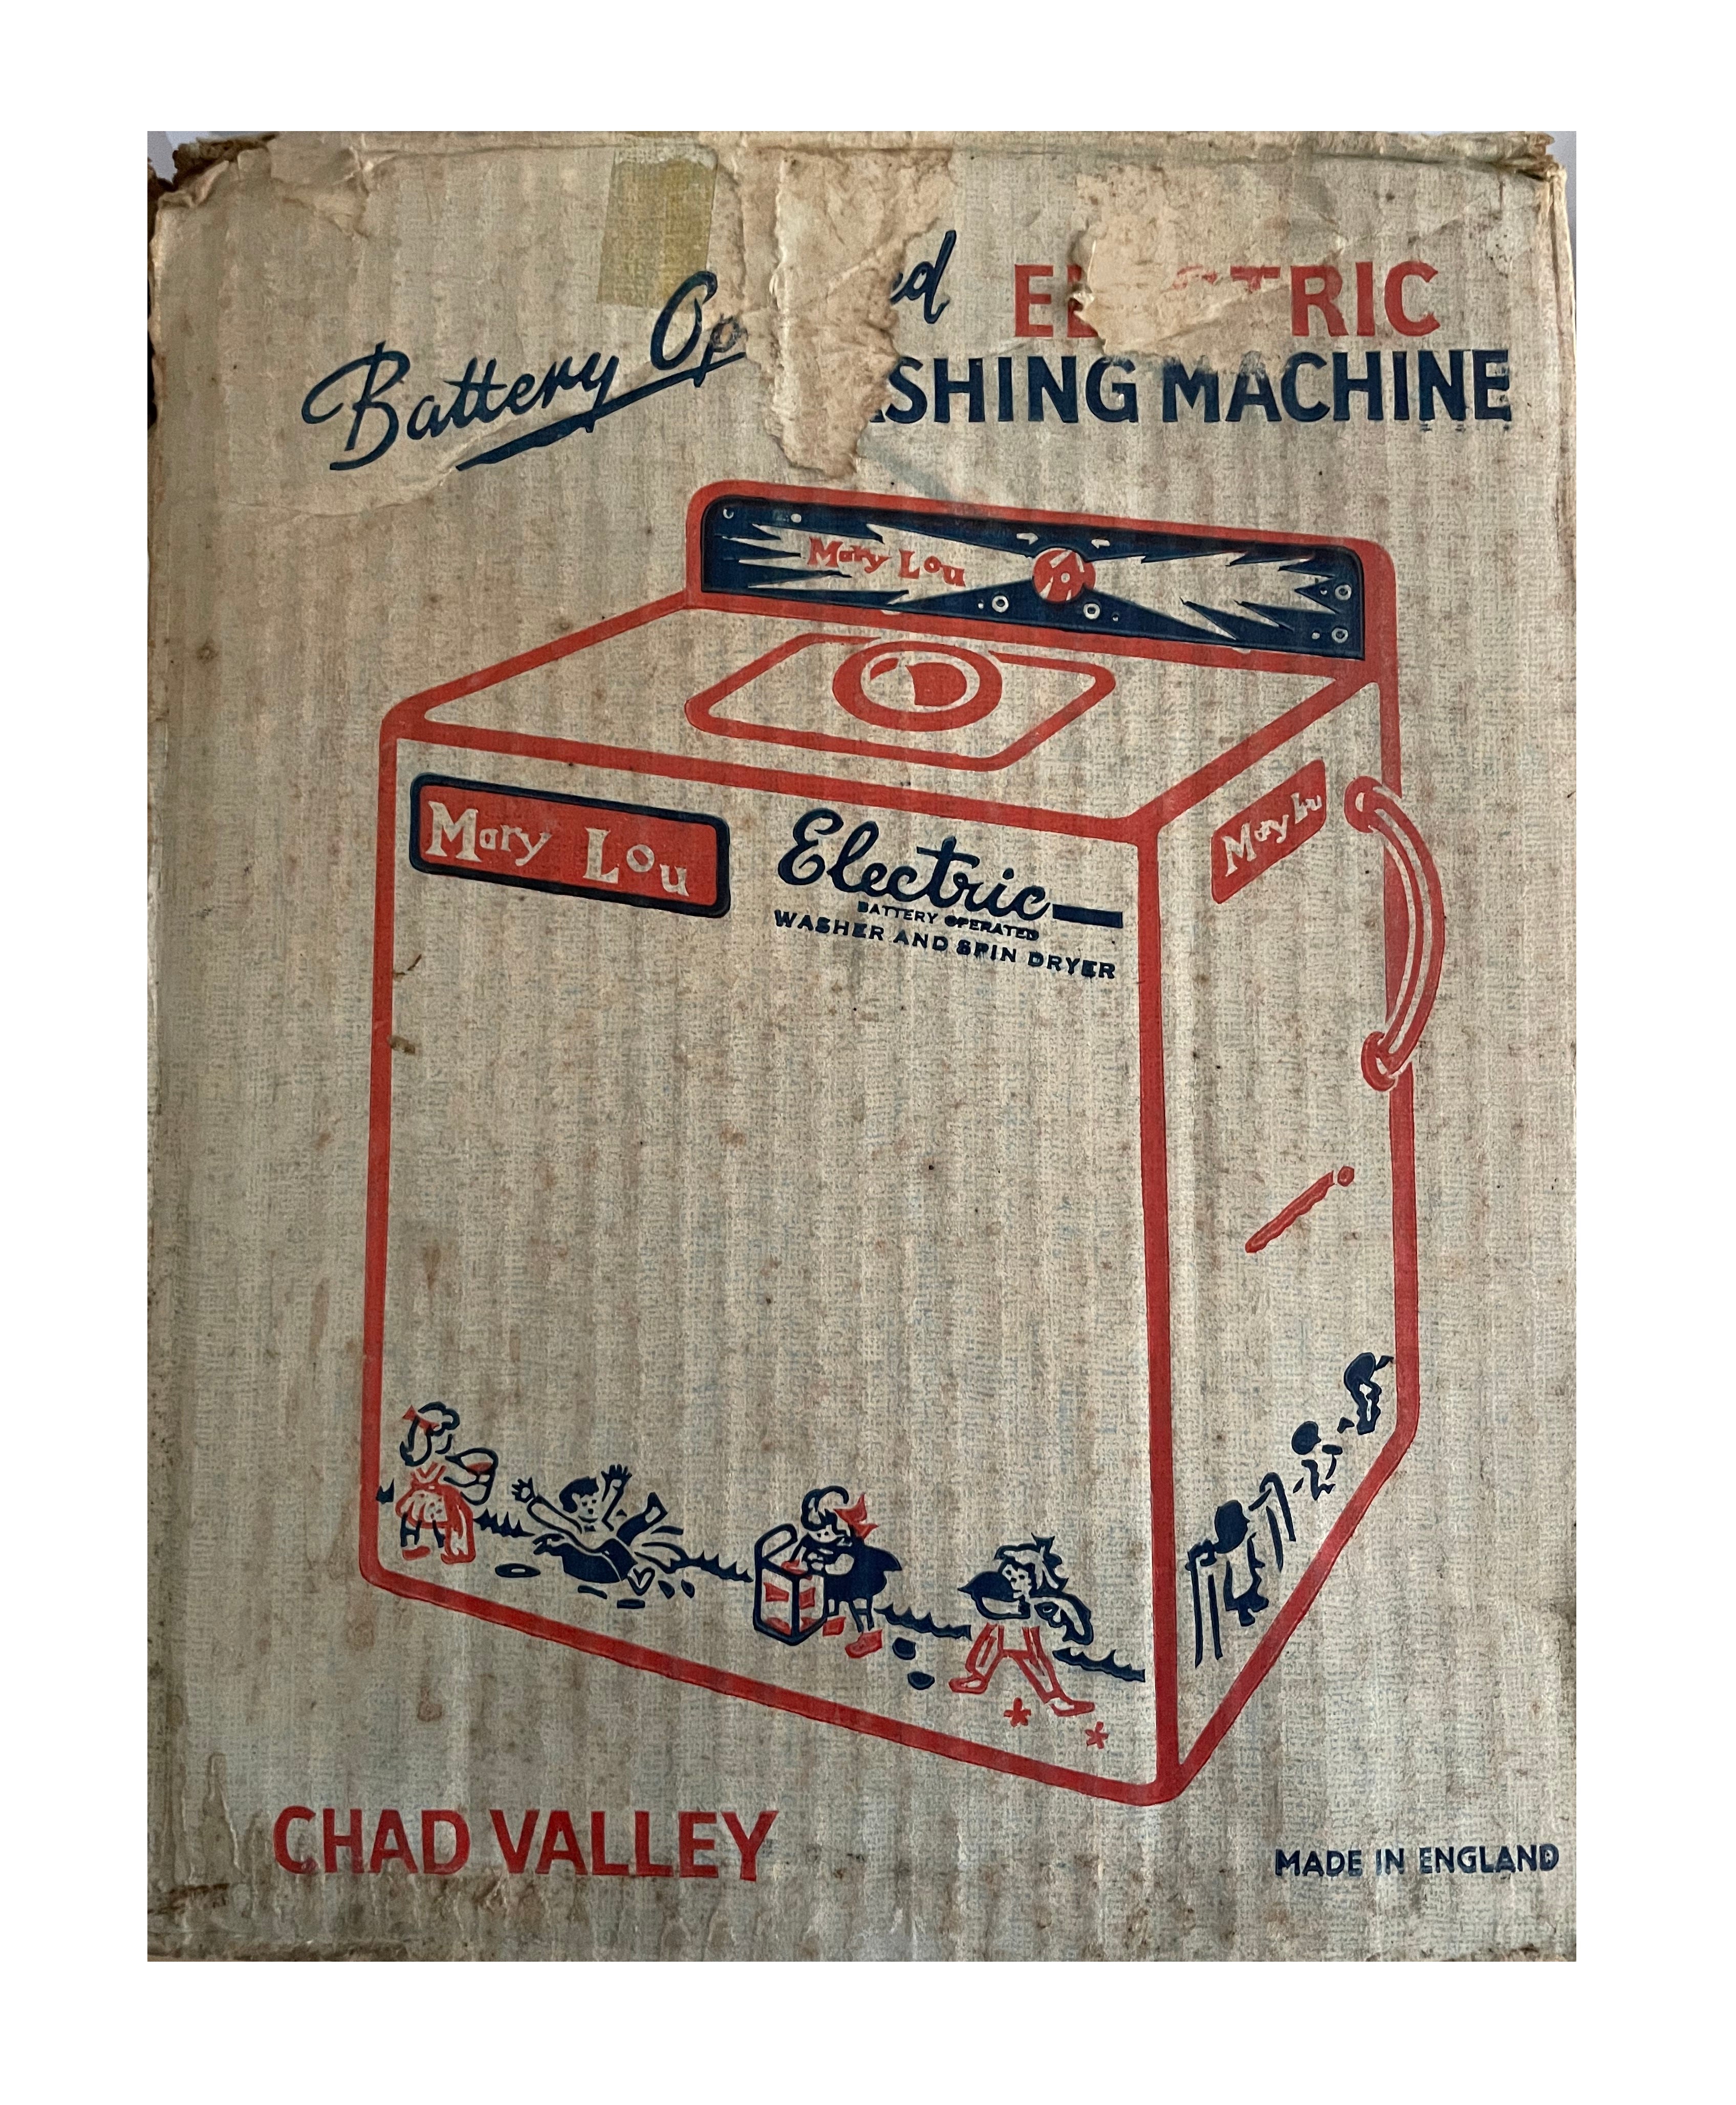 Chad Valley Vintage Chad Valley Mary Lou Washing Machine  & Spin Dryer Toy Spares Or Repair 